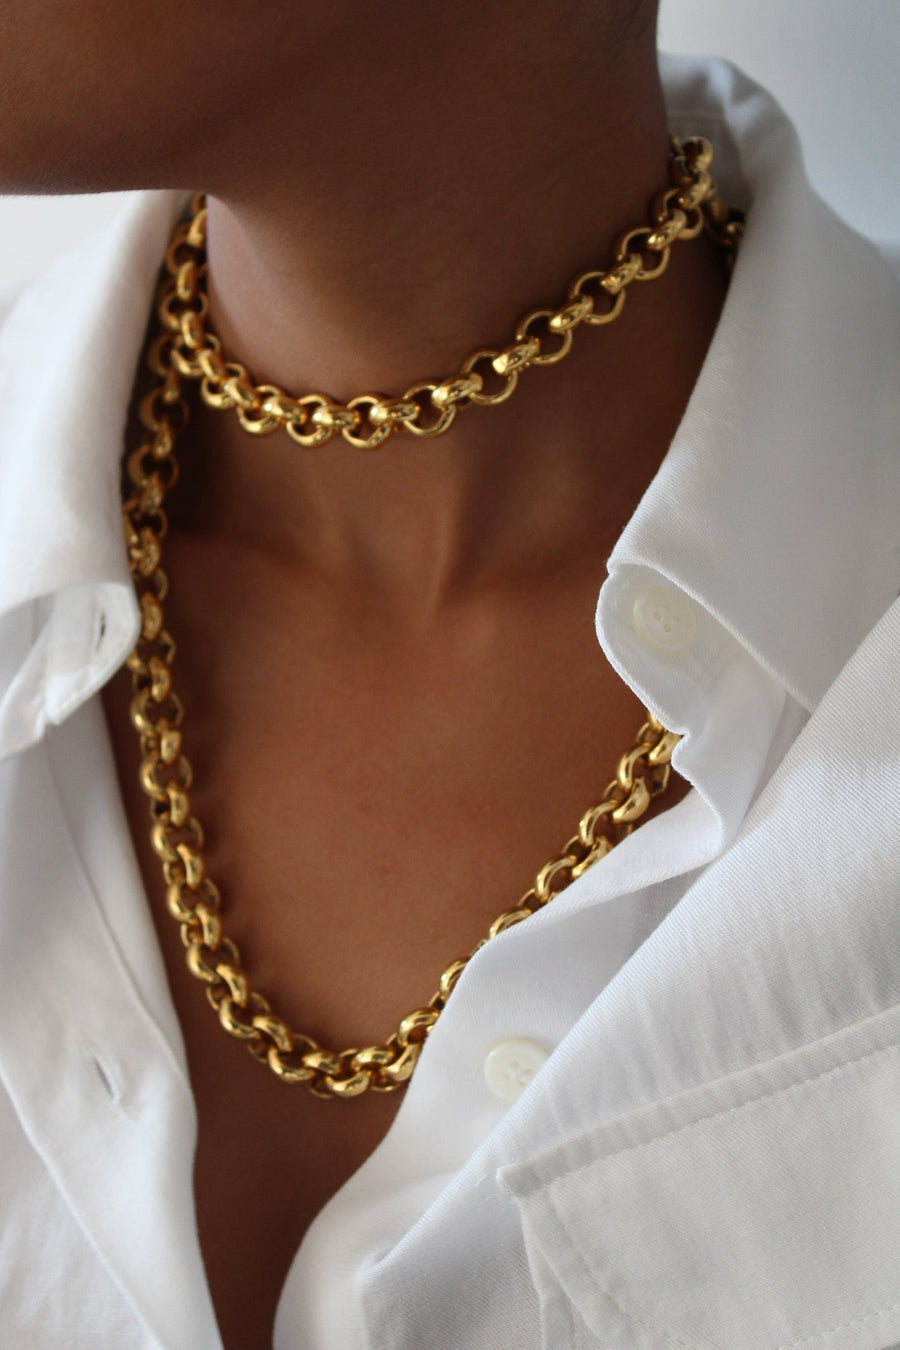 Chanel Vintage 1990s Heavy Chain Necklace